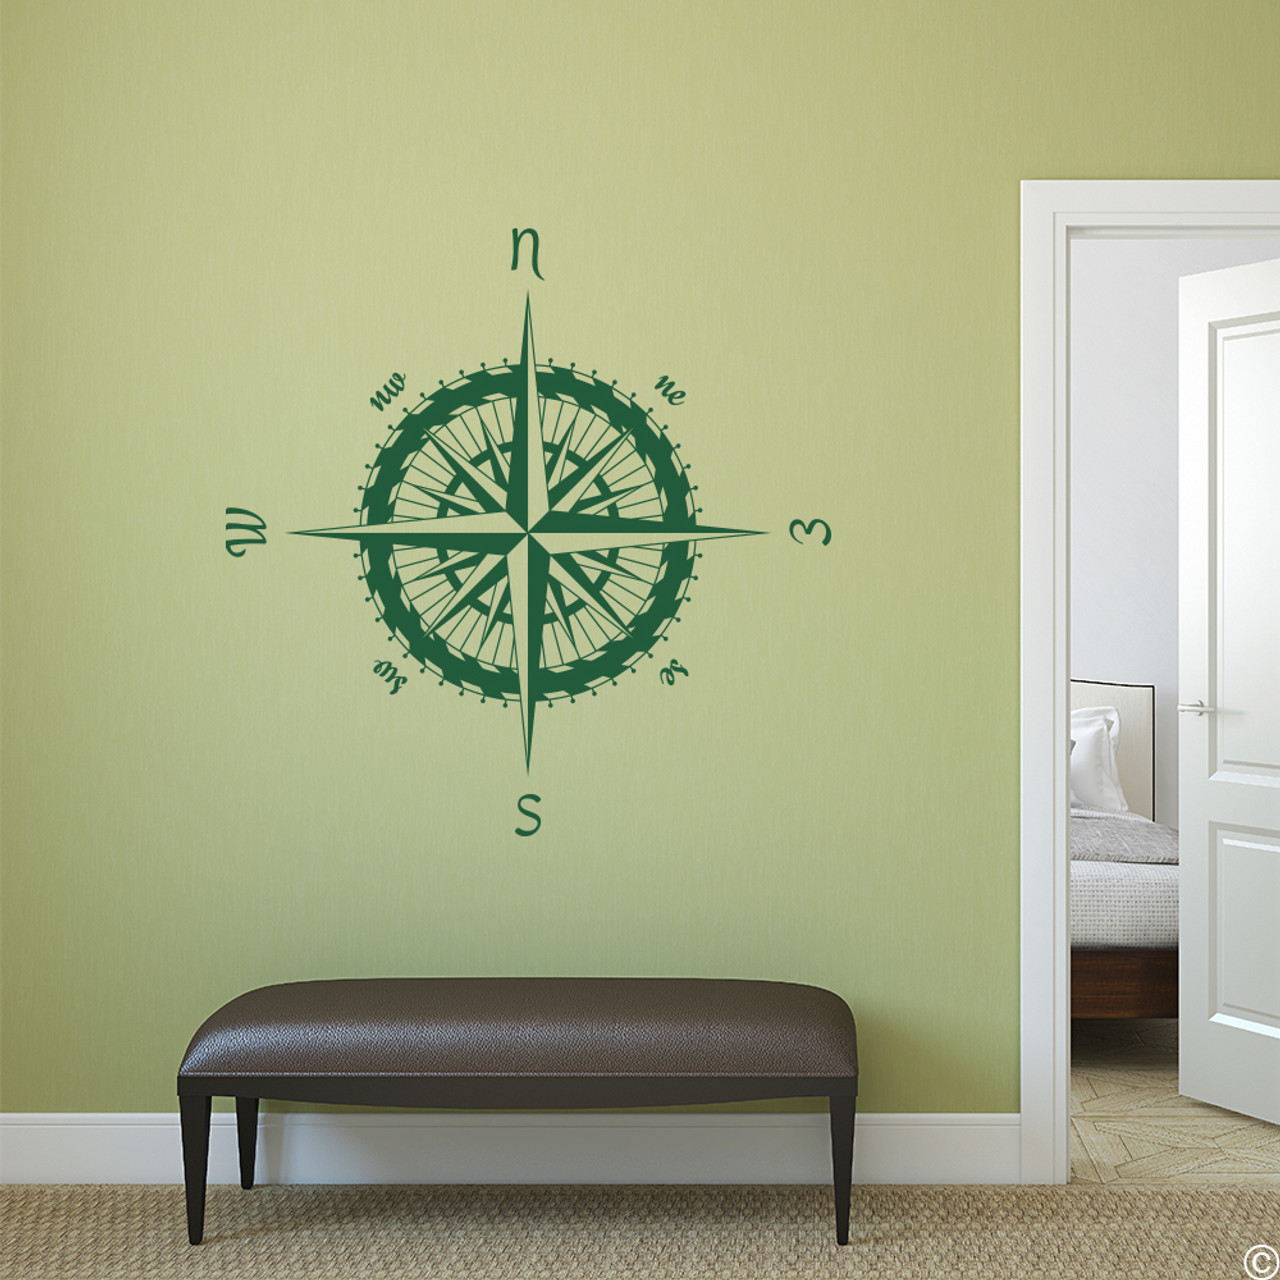 The Adrain compass rose vinyl wall or ceiling decal in dark green